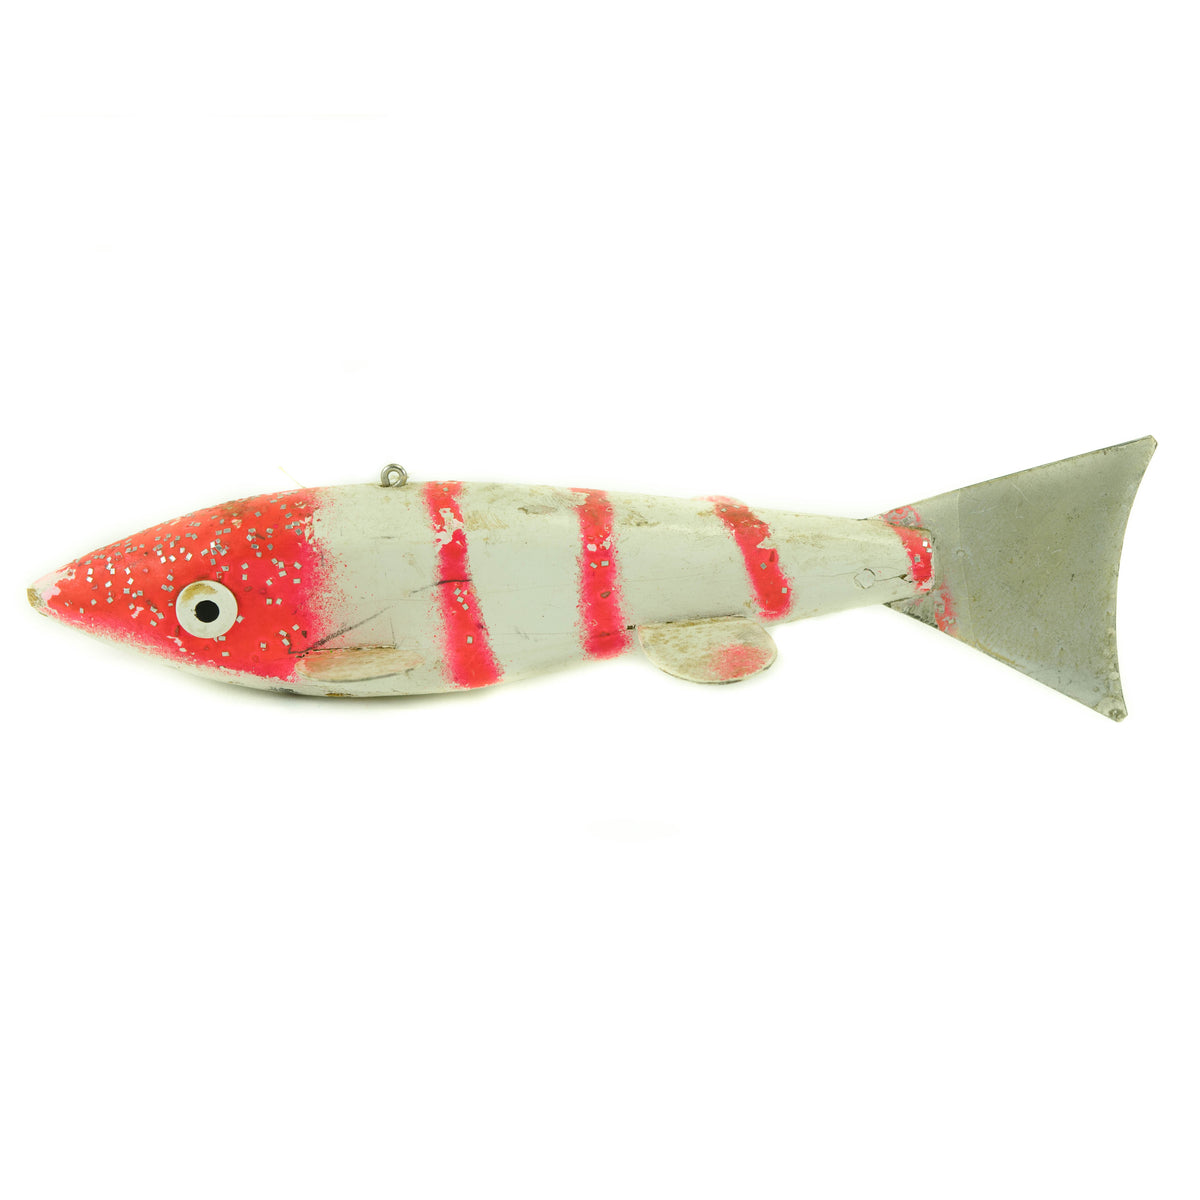 Randall spearing fish decoy -copper/silver